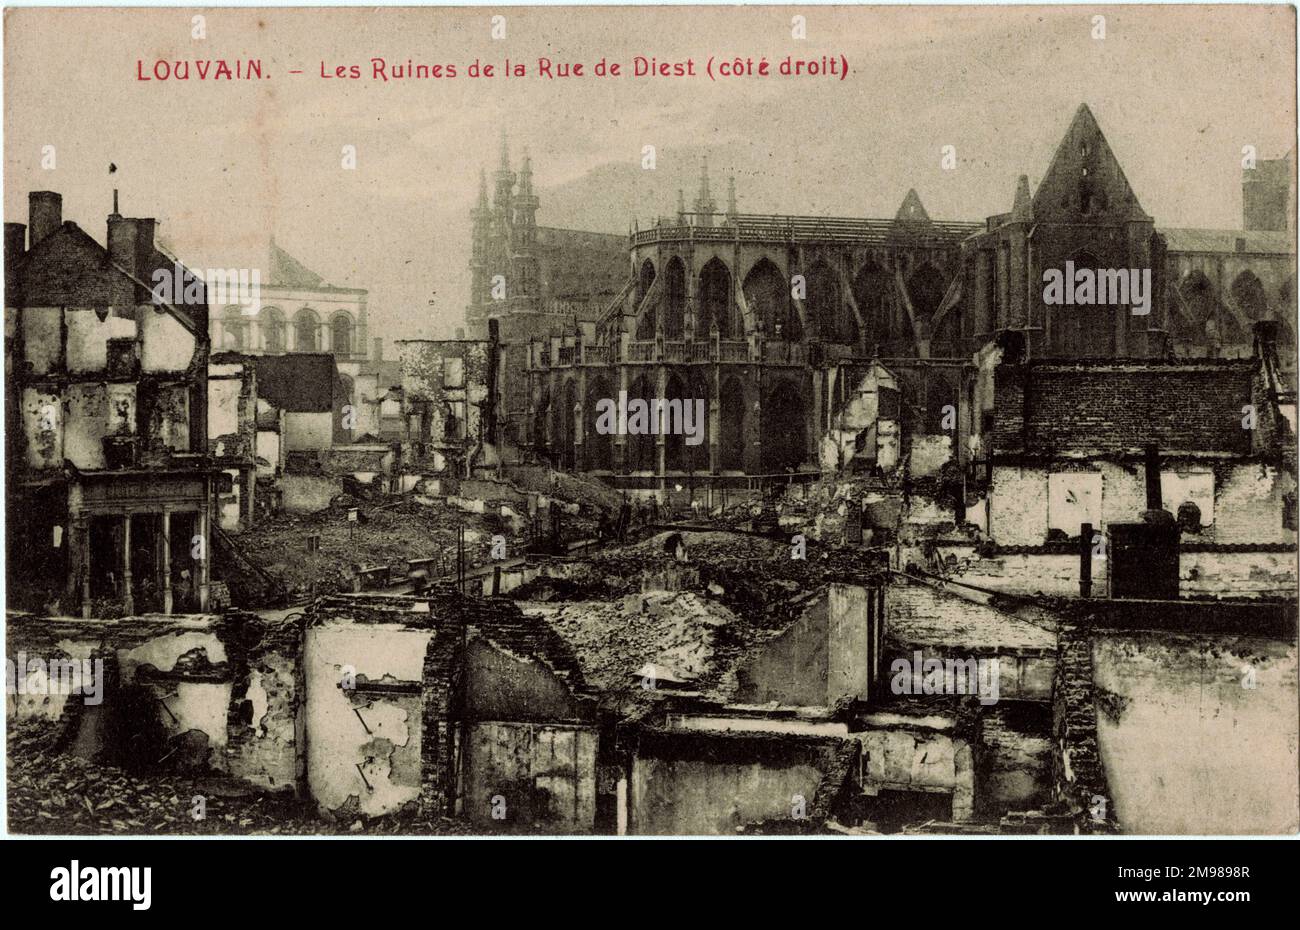 Louvain (Leuven), Belgium - damage in the Rue de Diest during WW1, with St Peter's Church on the right showing some damage to the roof, and the three spires of the Town Hall visible in the middle distance. Stock Photo